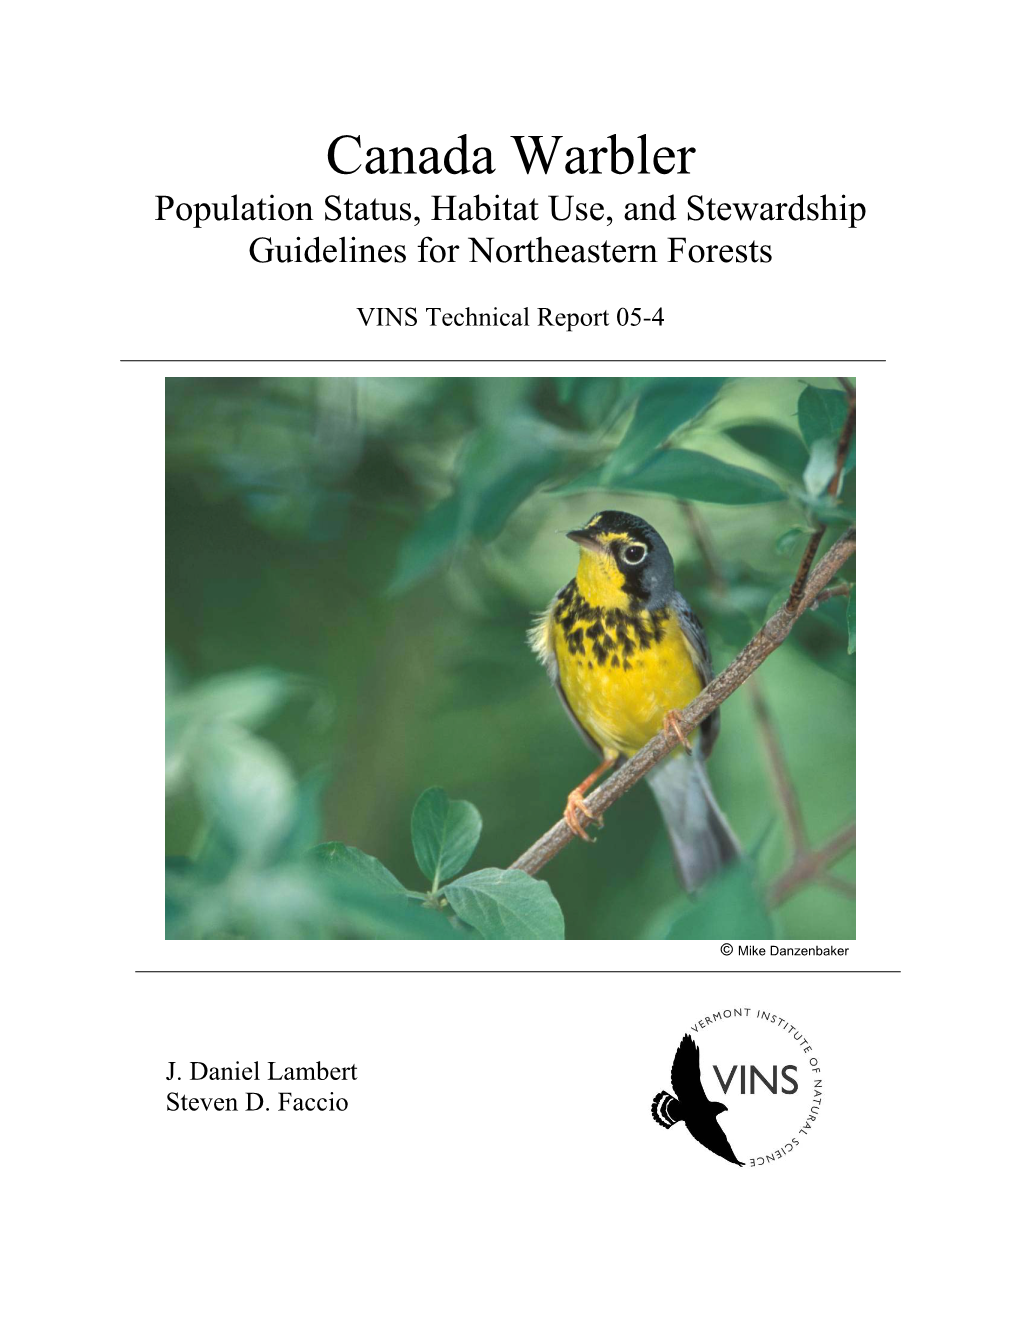 Canada Warbler Population Status, Habitat Use, and Stewardship Guidelines for Northeastern Forests